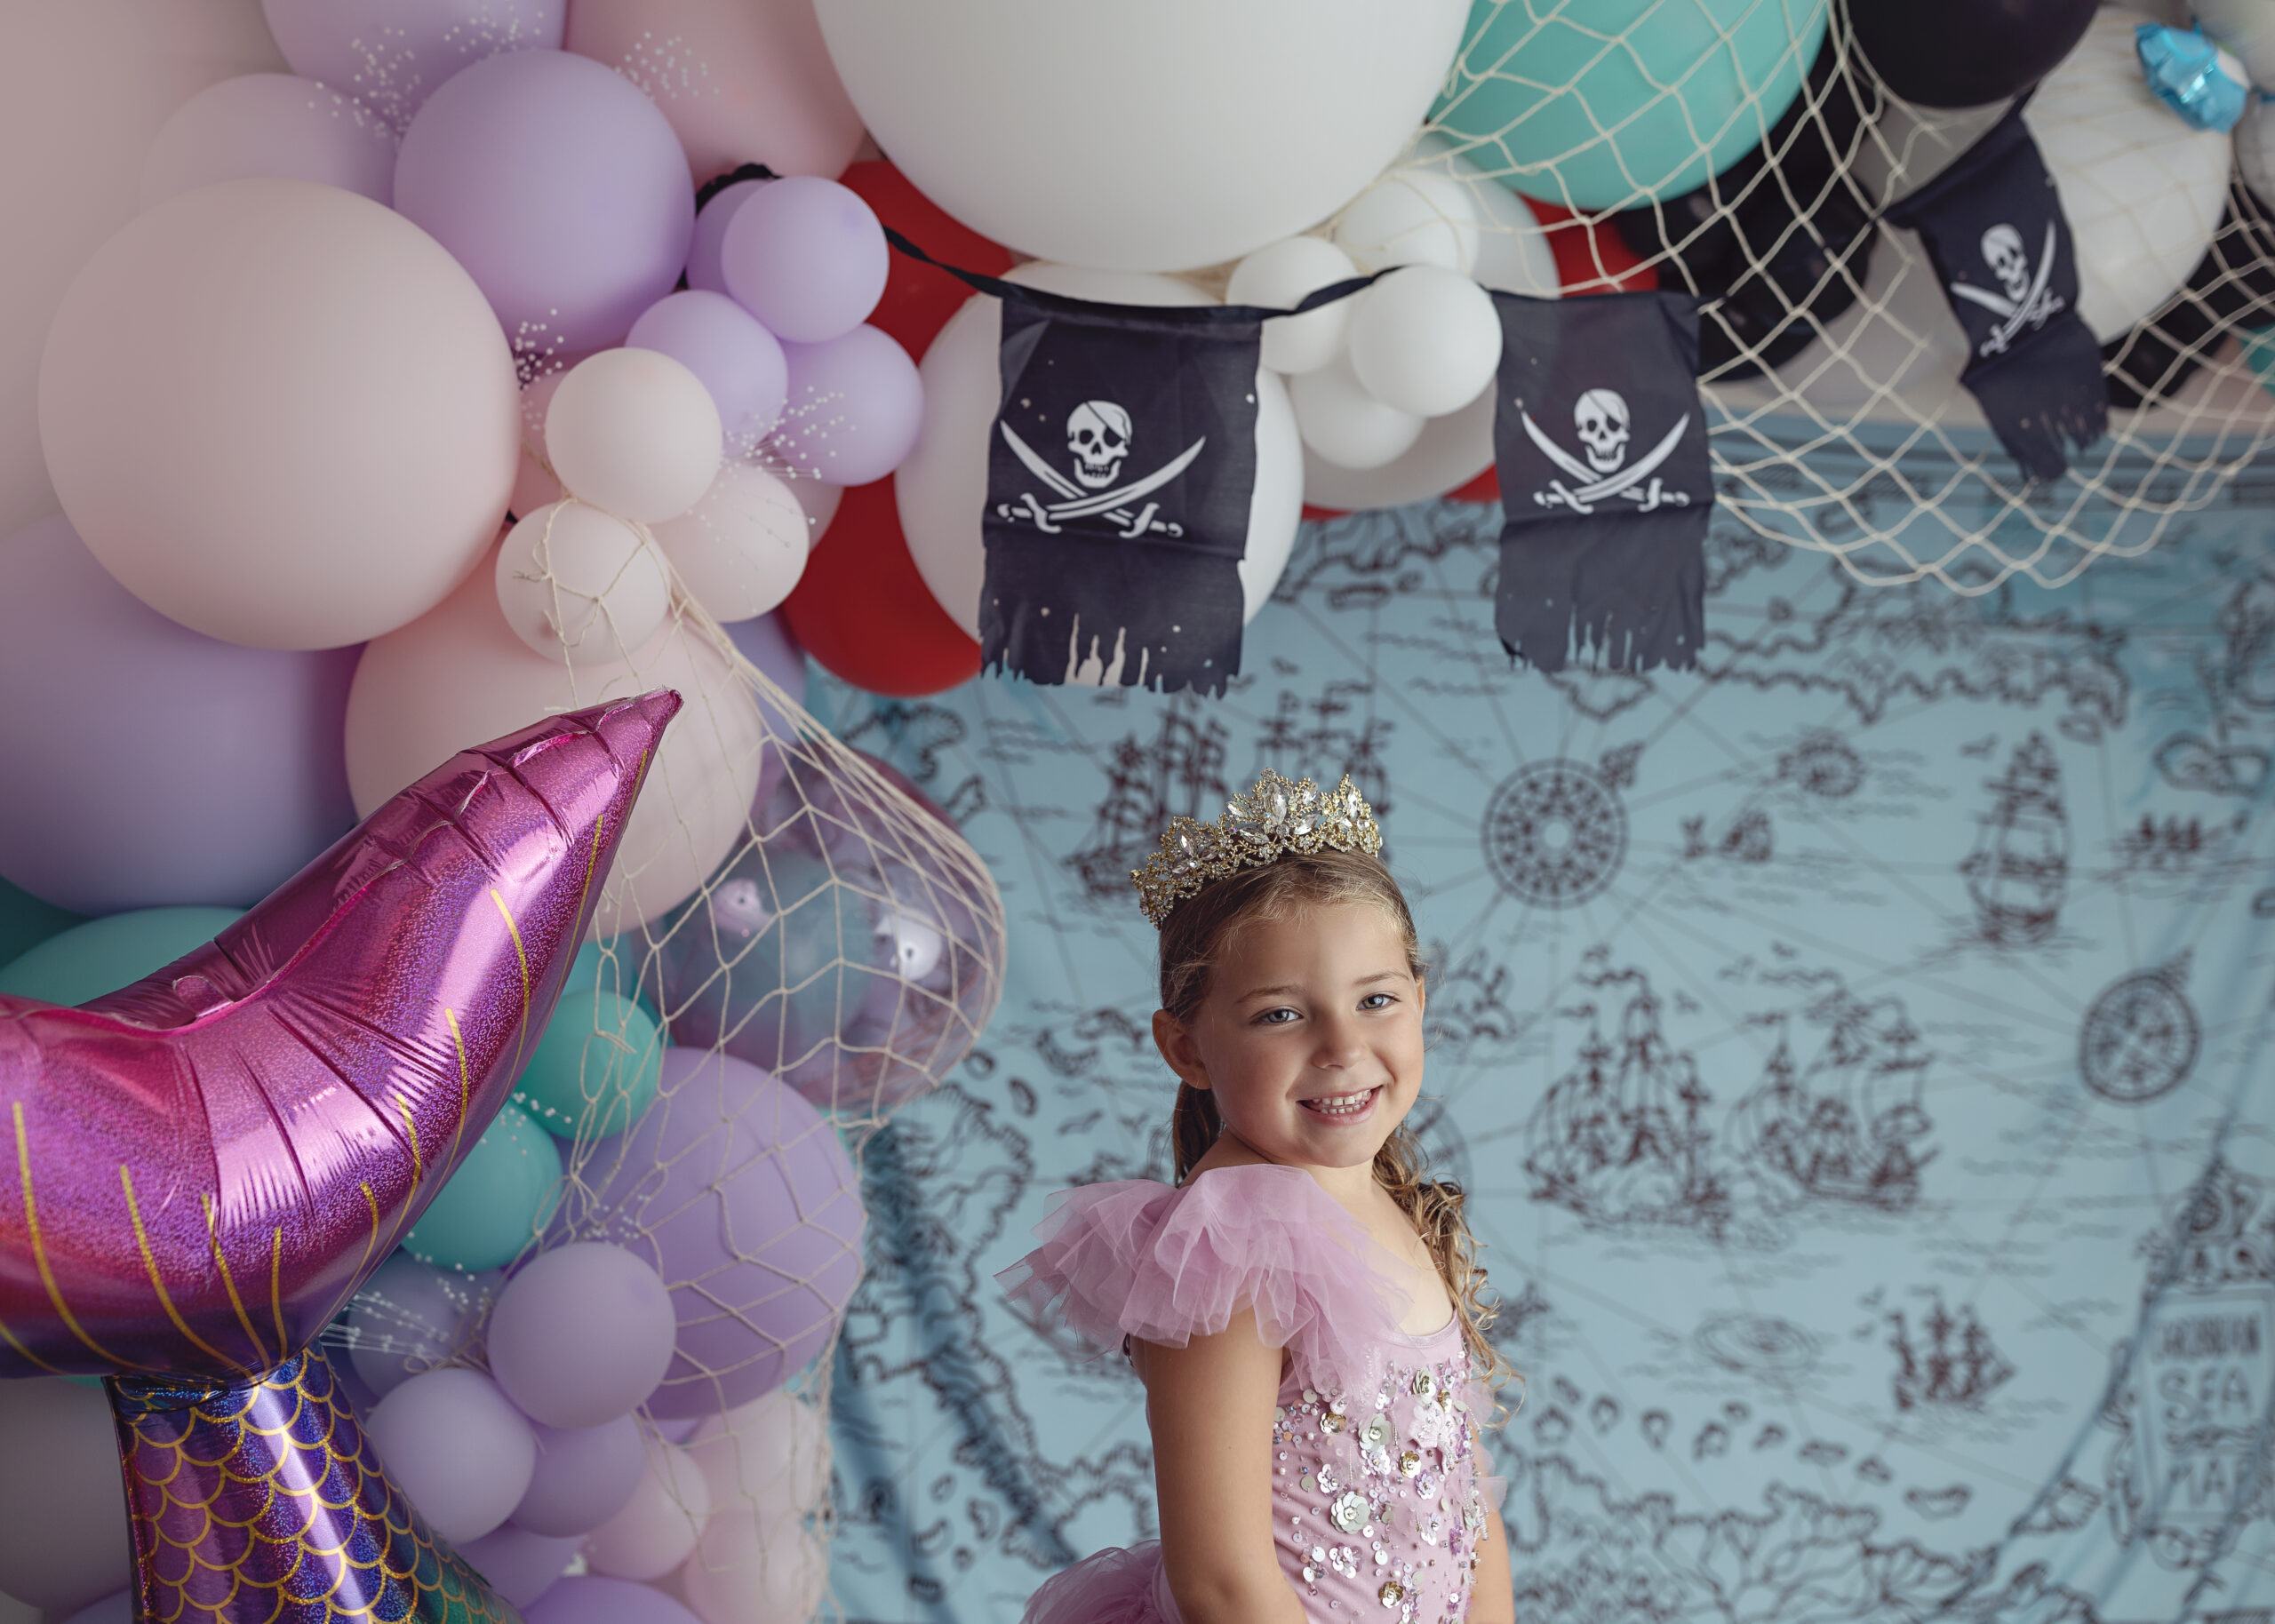 5th birthday girl wearing fancy dress & crown in front of pirate & mermaid themed balloon arch and map backgrounds